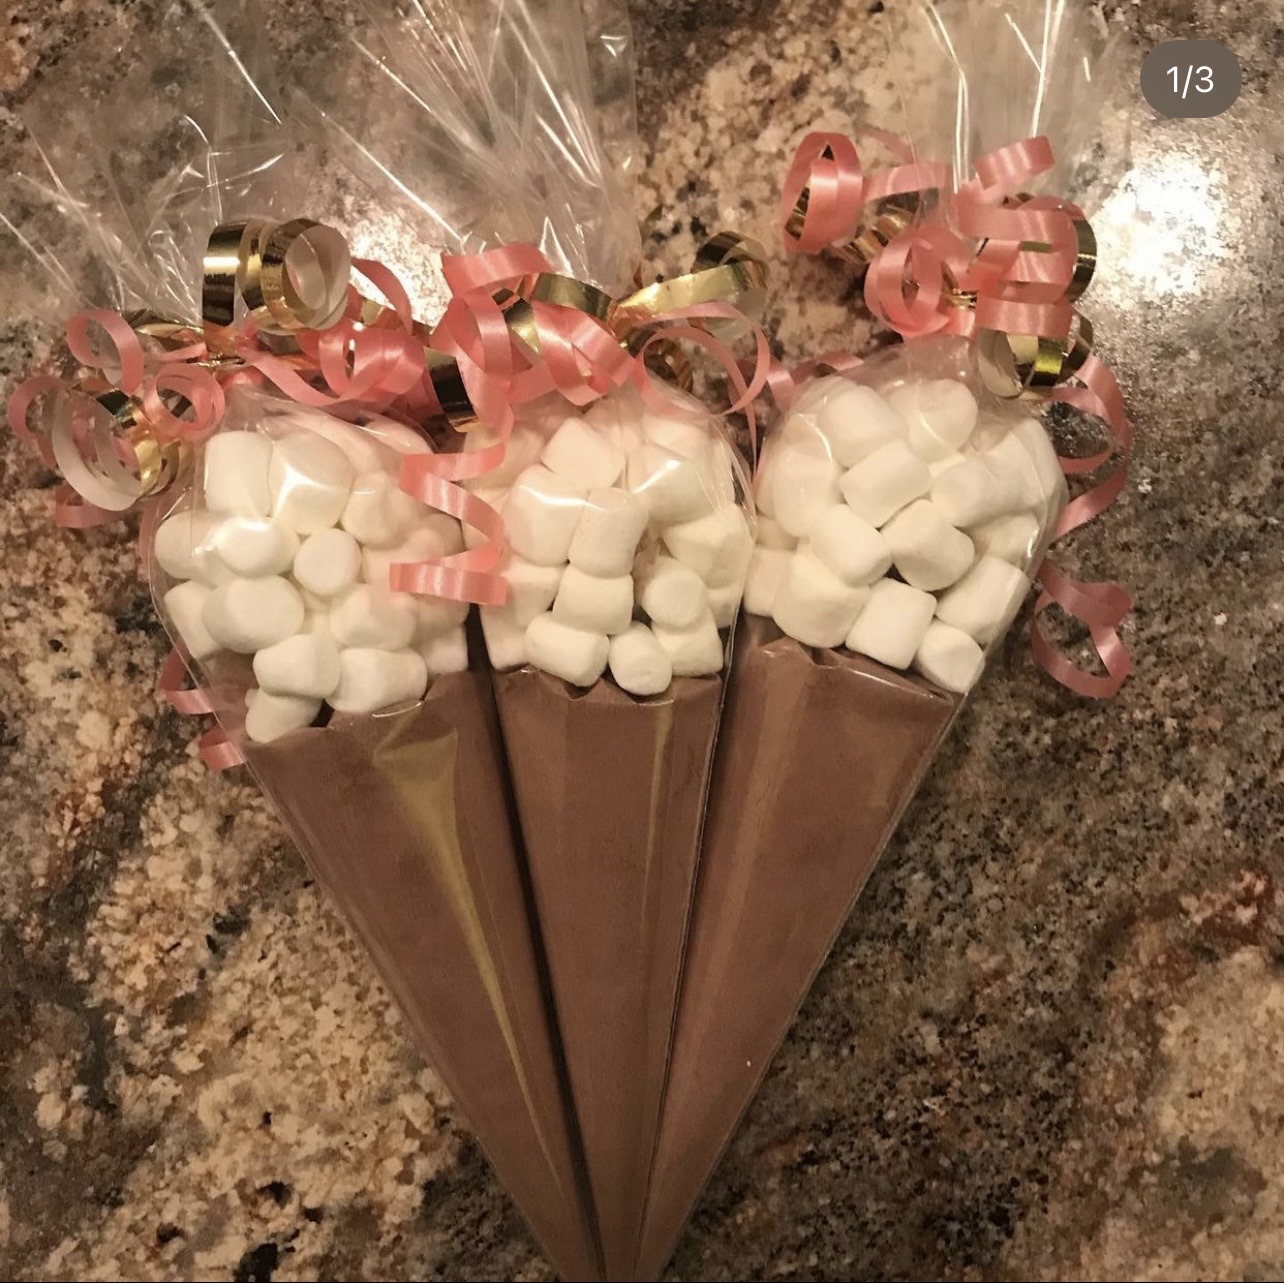 Set of 25 Hot Chocolate Favors w/marshmallows